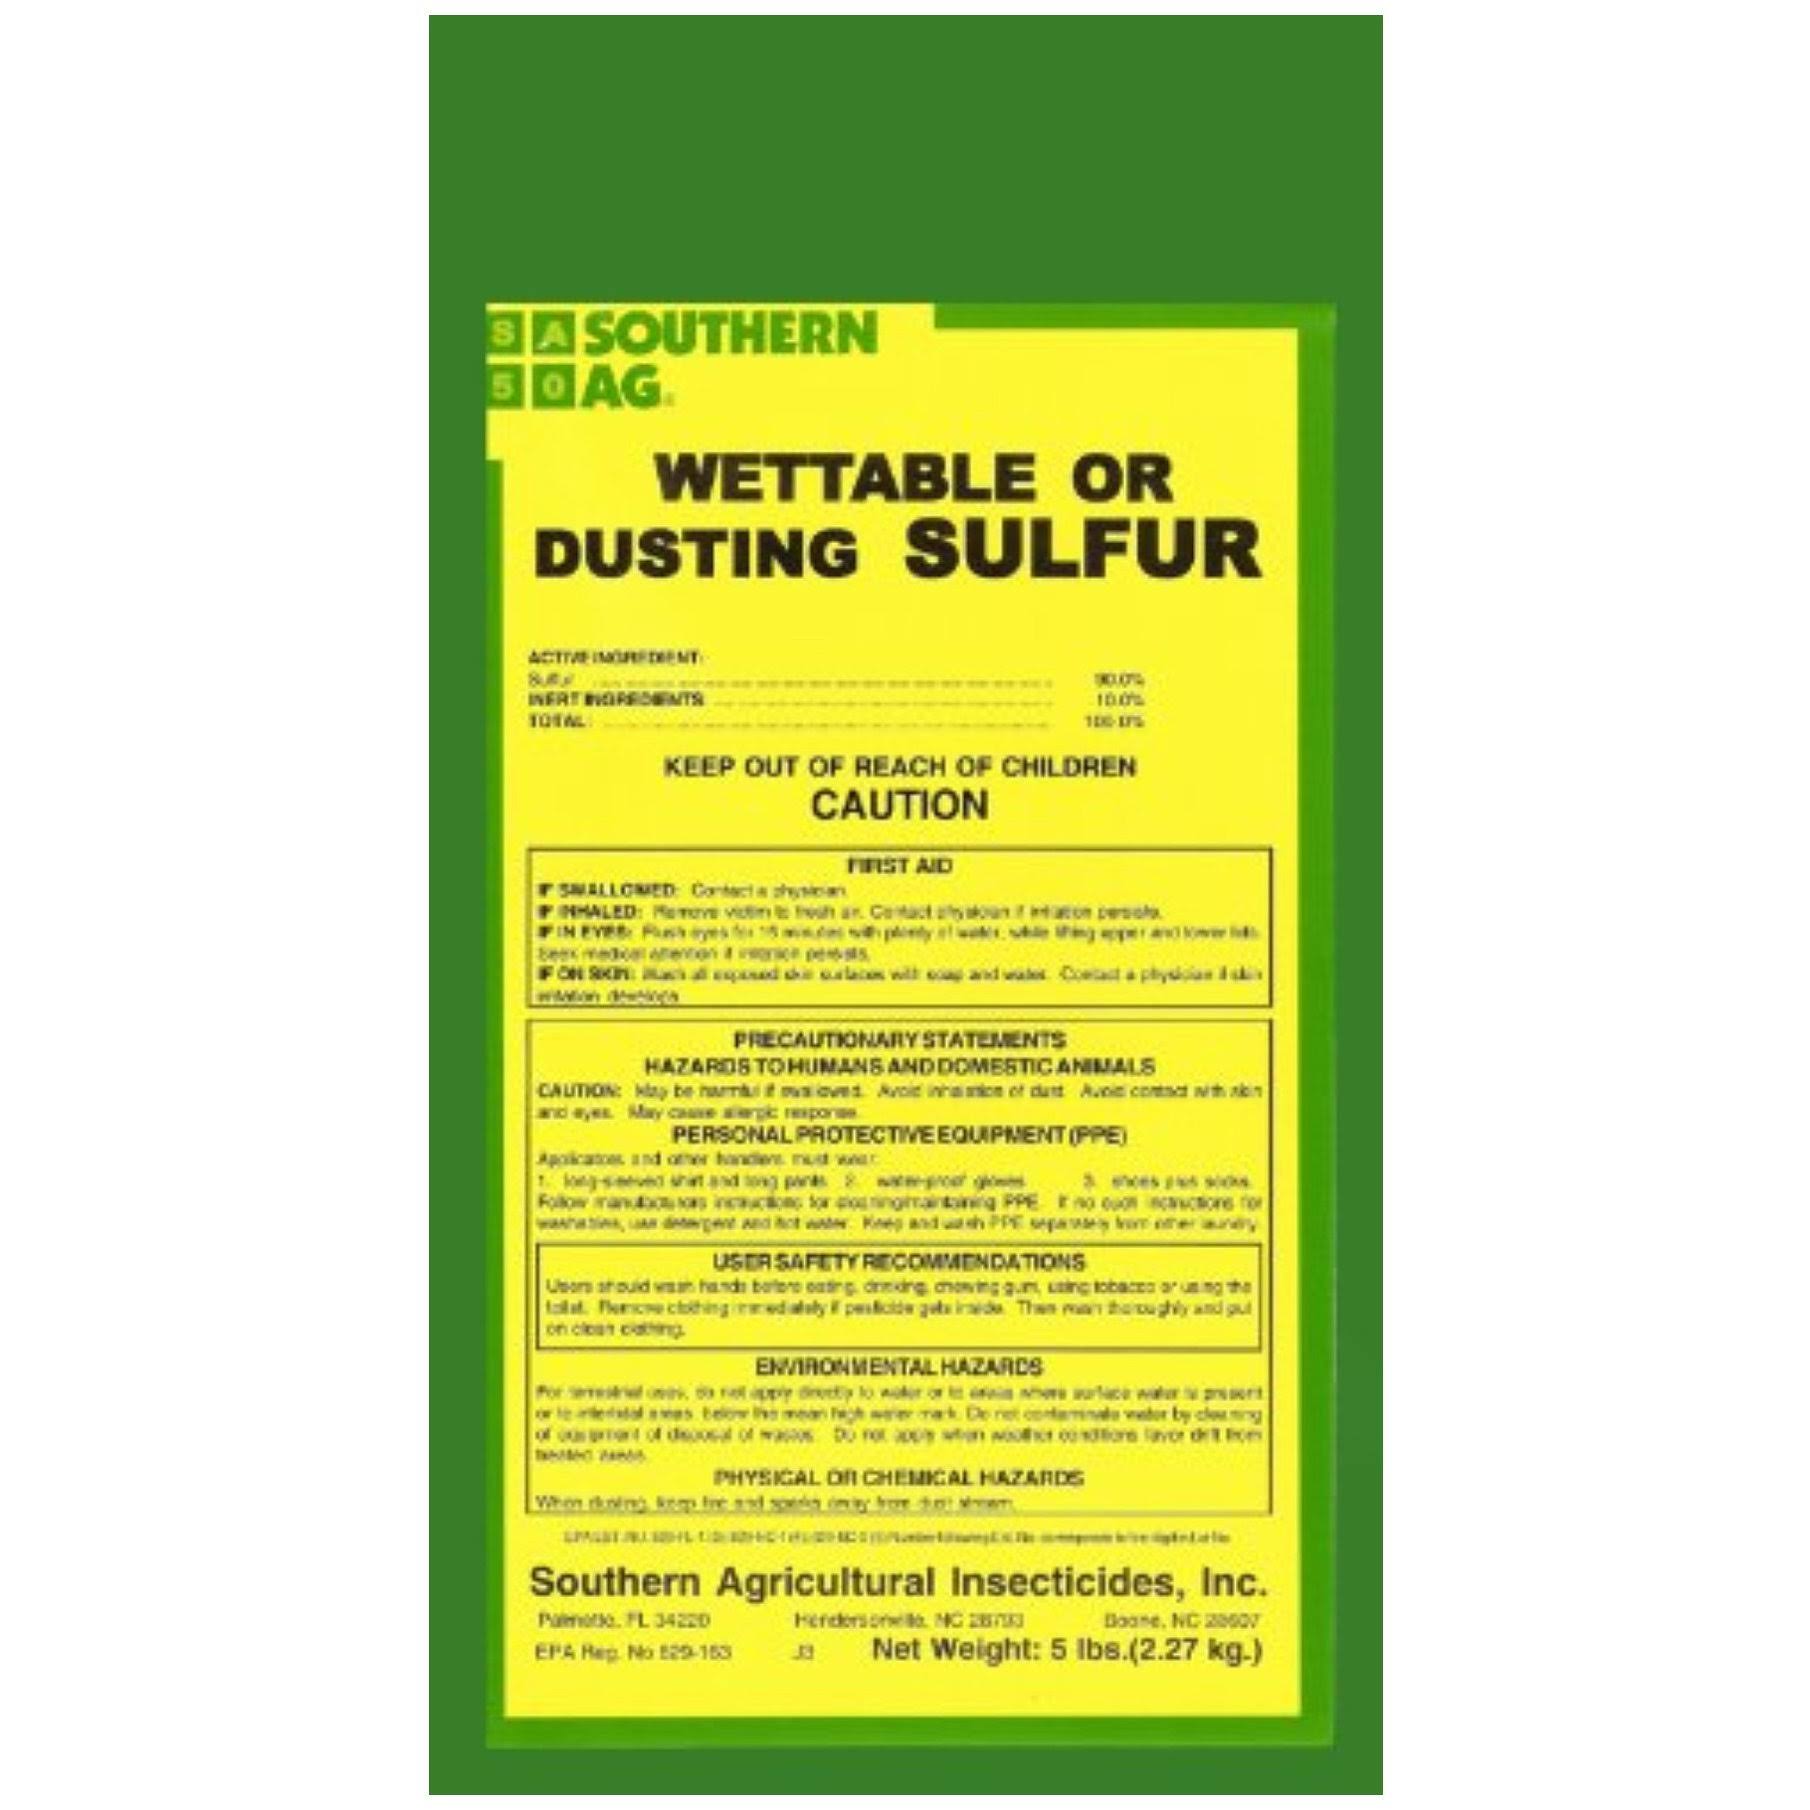 Southern AG Wettable or Dusting Sulfur - 5lbs